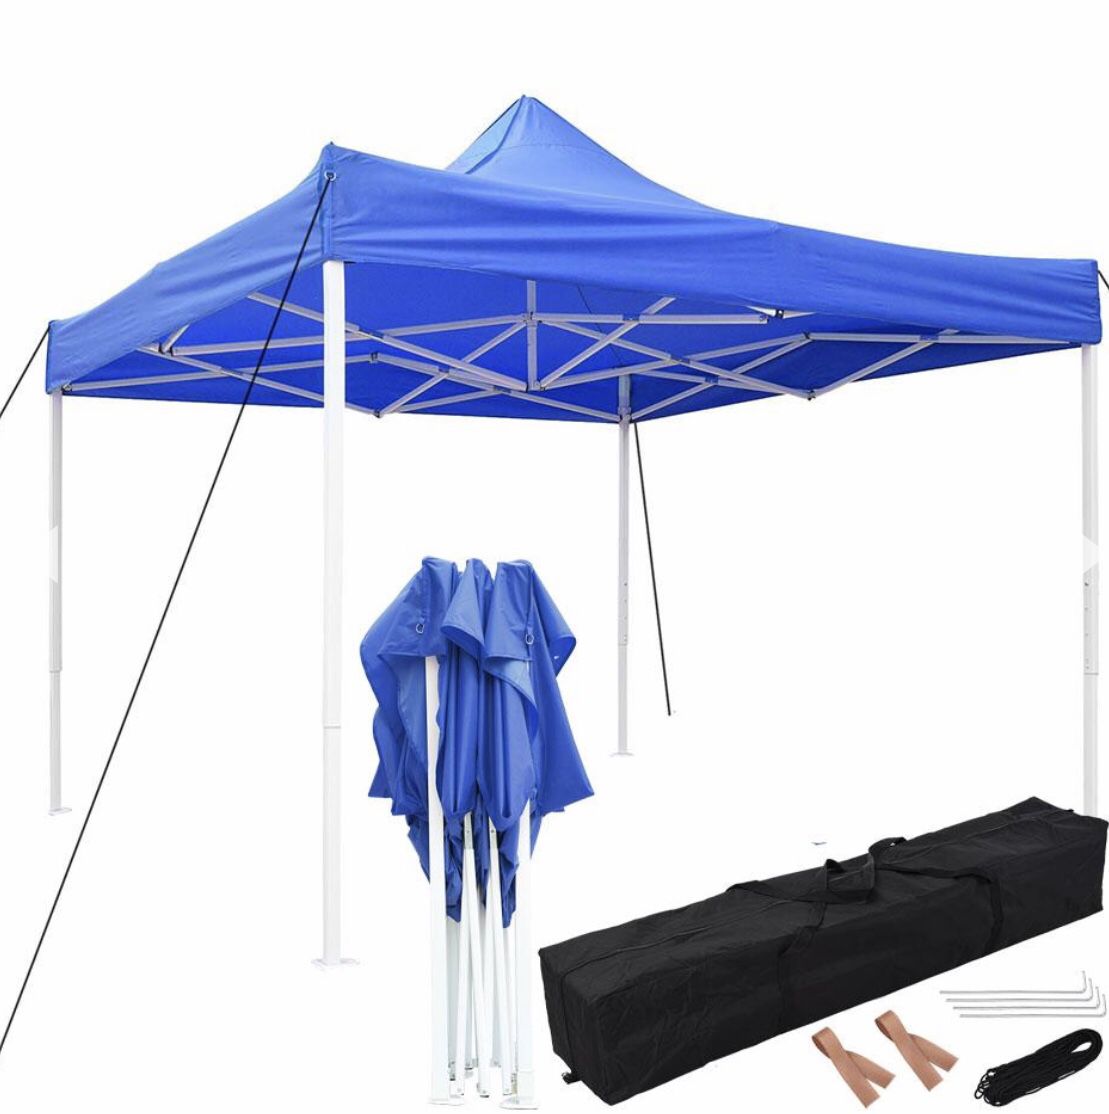 ☀️☀️☀️10x10ft Pop Up Canopy Tent with Storage bag☀️☀️☀️